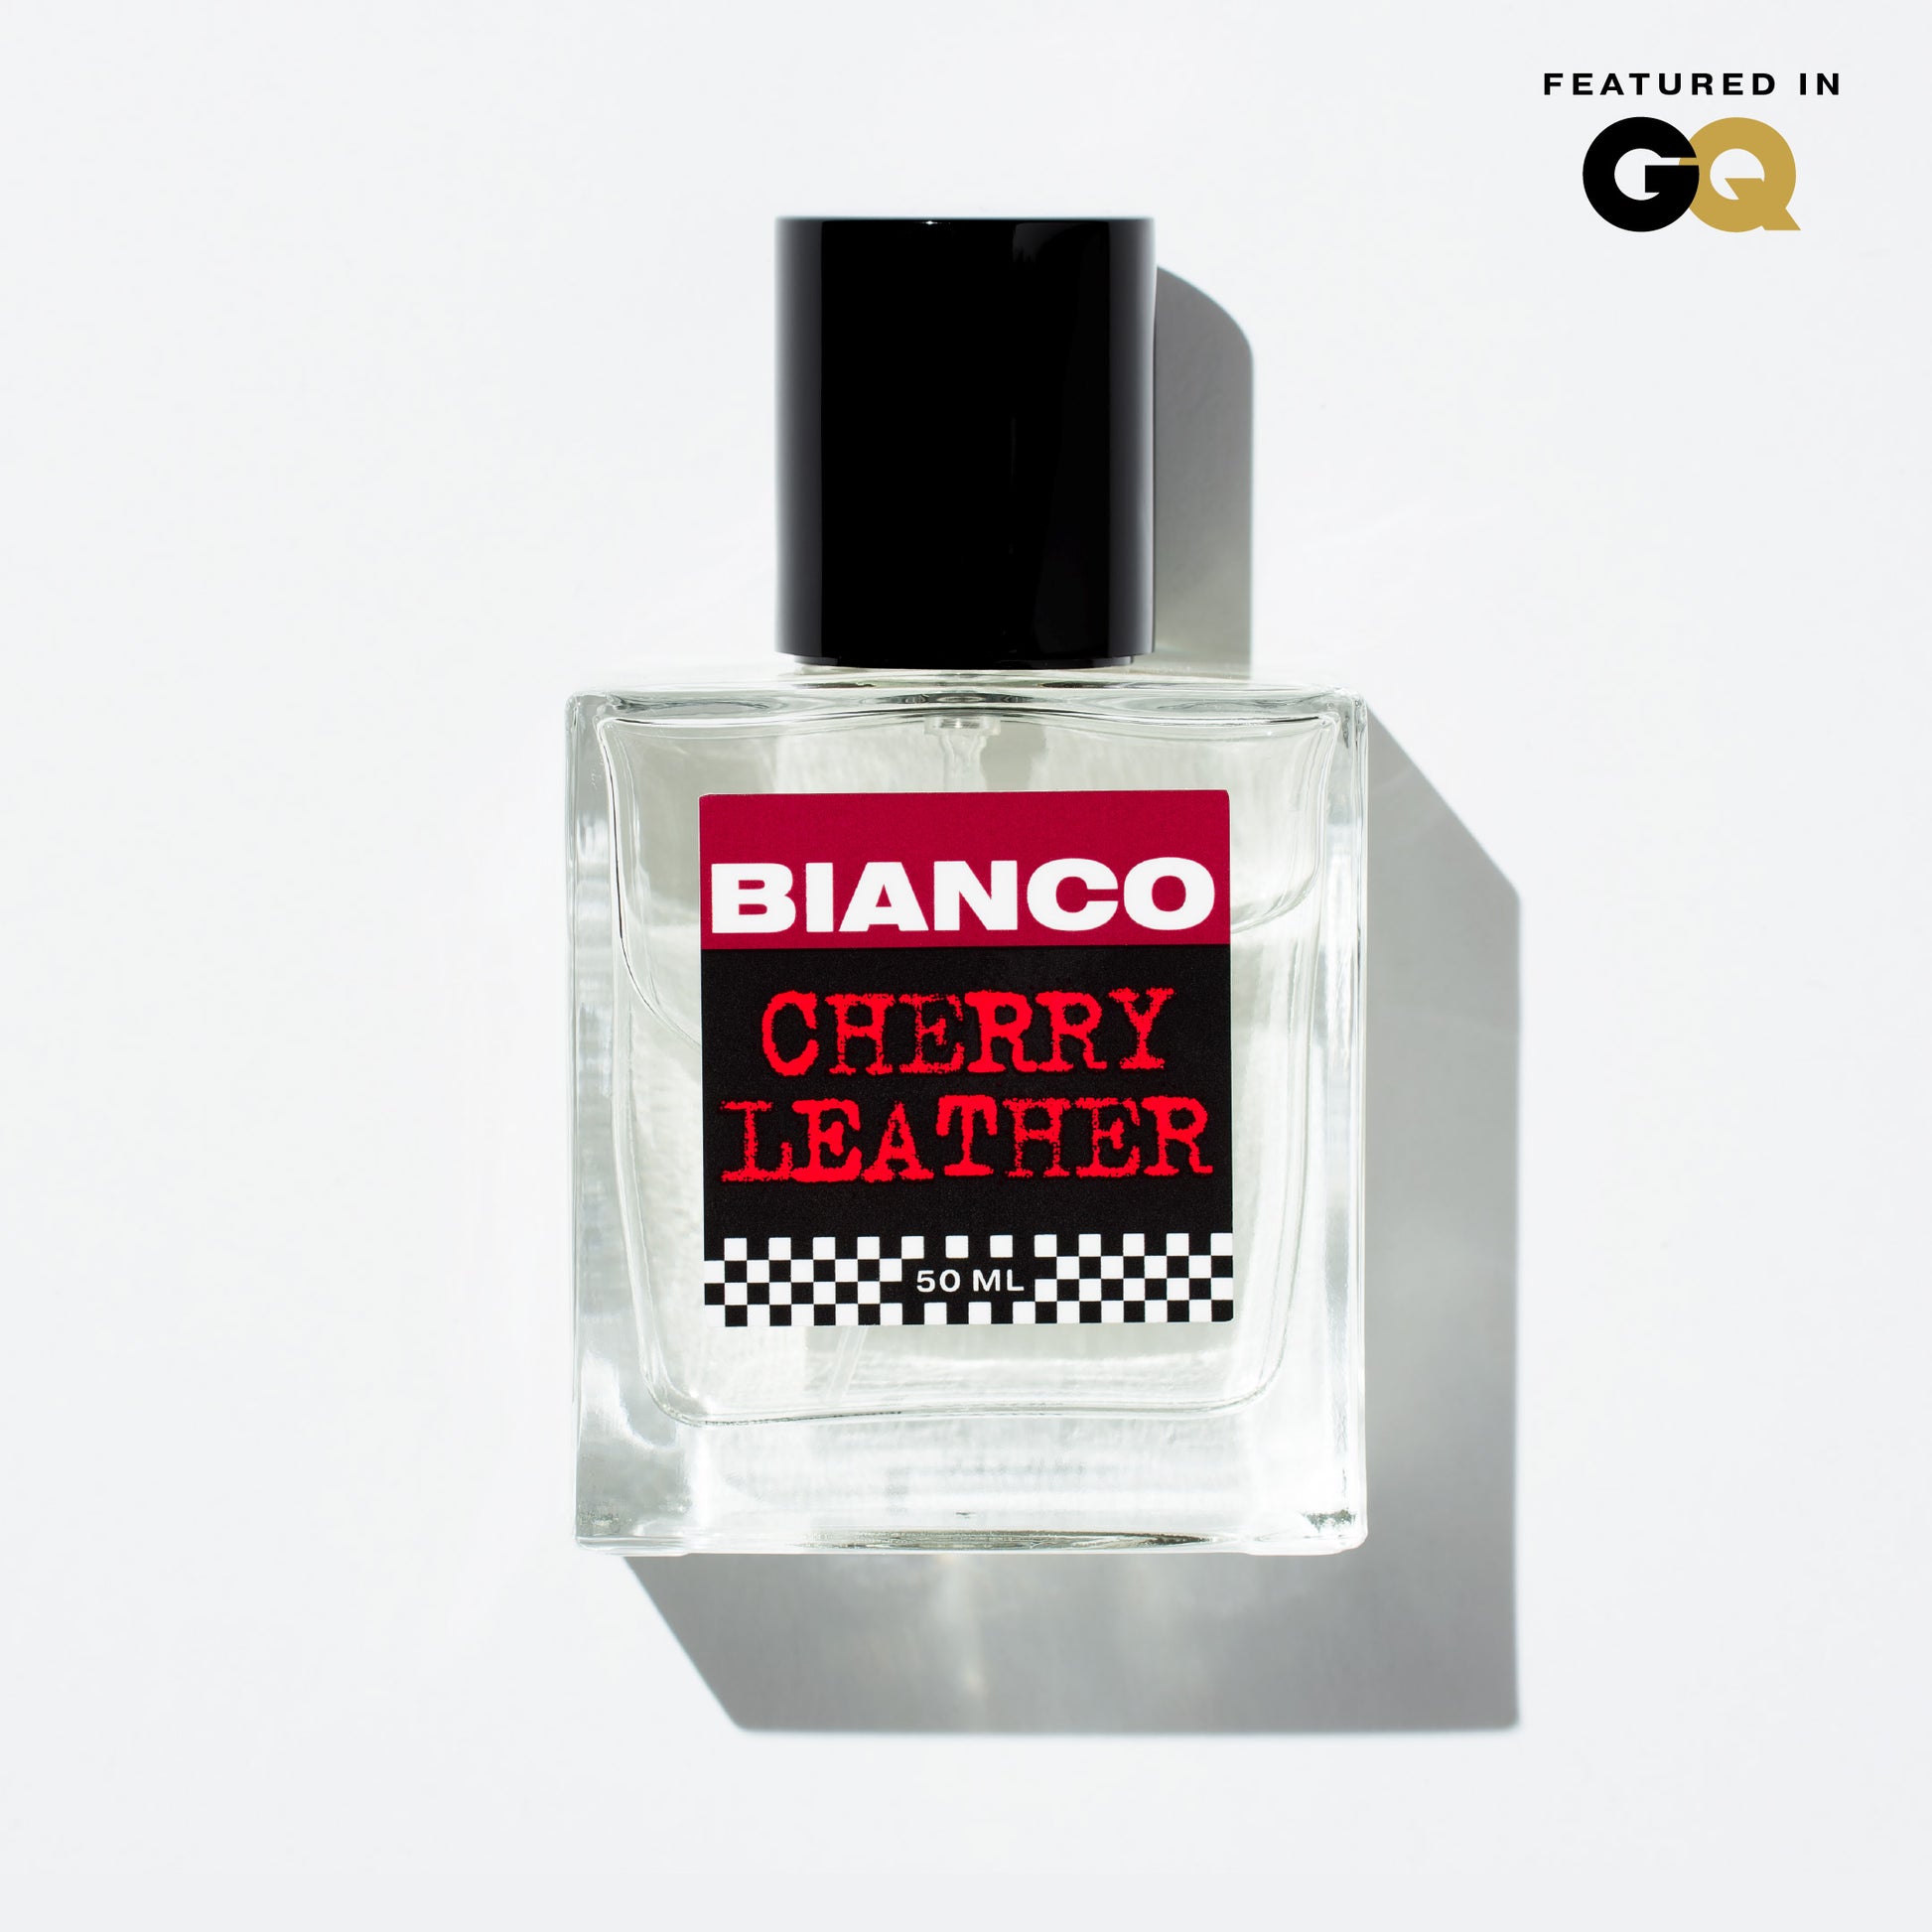 Bianco Profumo Cherry Leather with notes of Bitter Fennel, Star Anise, Black Pepper, Saffron, Ambrette Seed, Cherry, Bitter Almond, Guaiacwood, Pine Tar, Suede, Amber, Oakwood, Moss, and Musk. Bottle on clean white background.